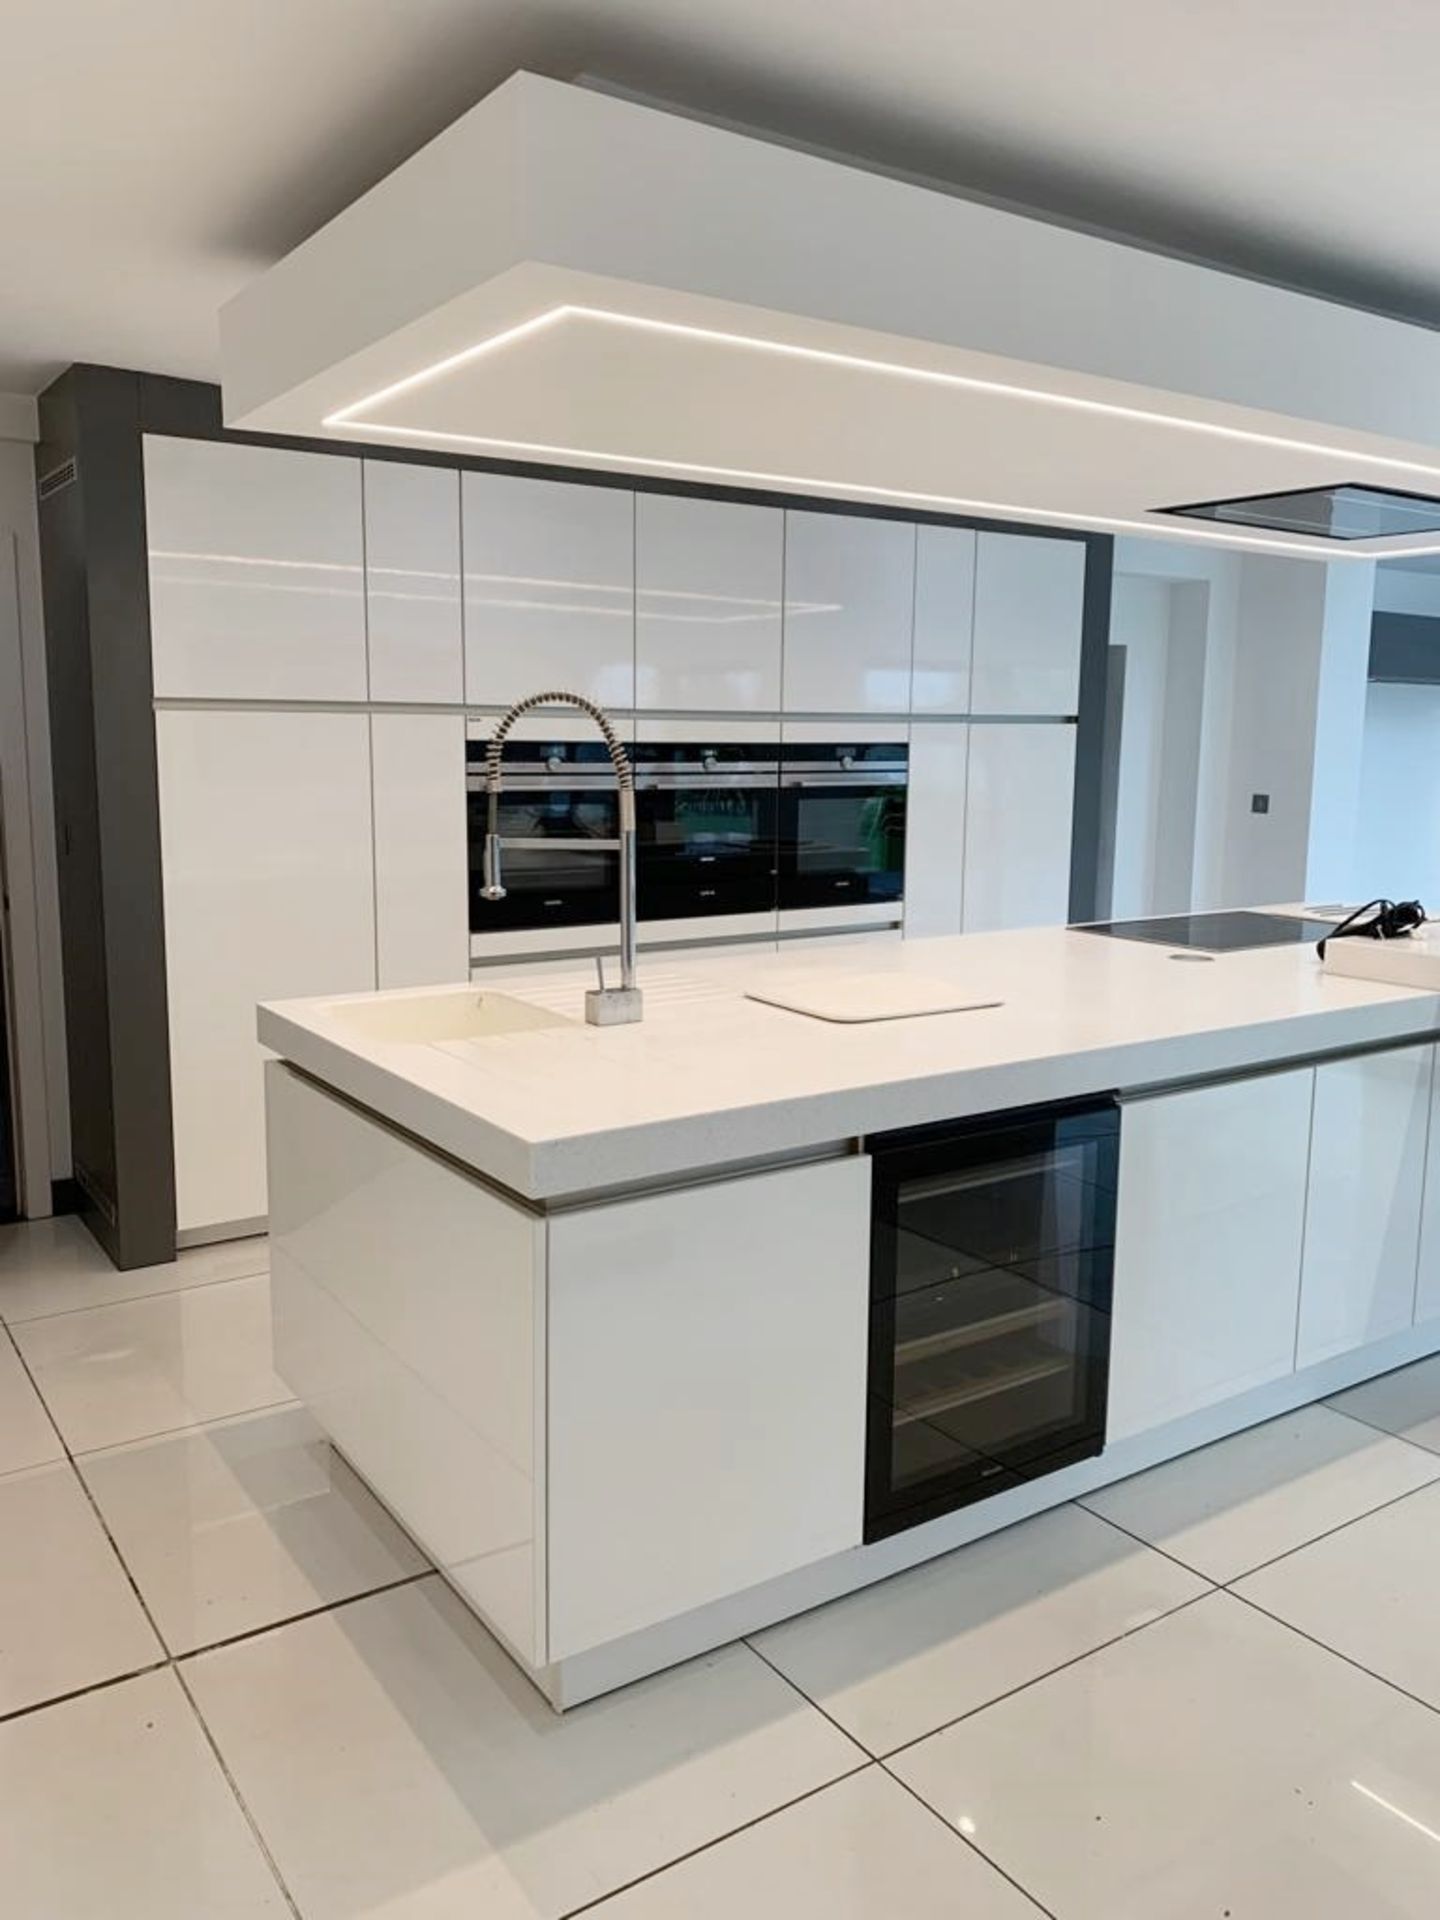 1 x SieMatic Contemporary Fitted Kitchen With Branded Appliances, Central Island + Corian Worktops - Image 3 of 100